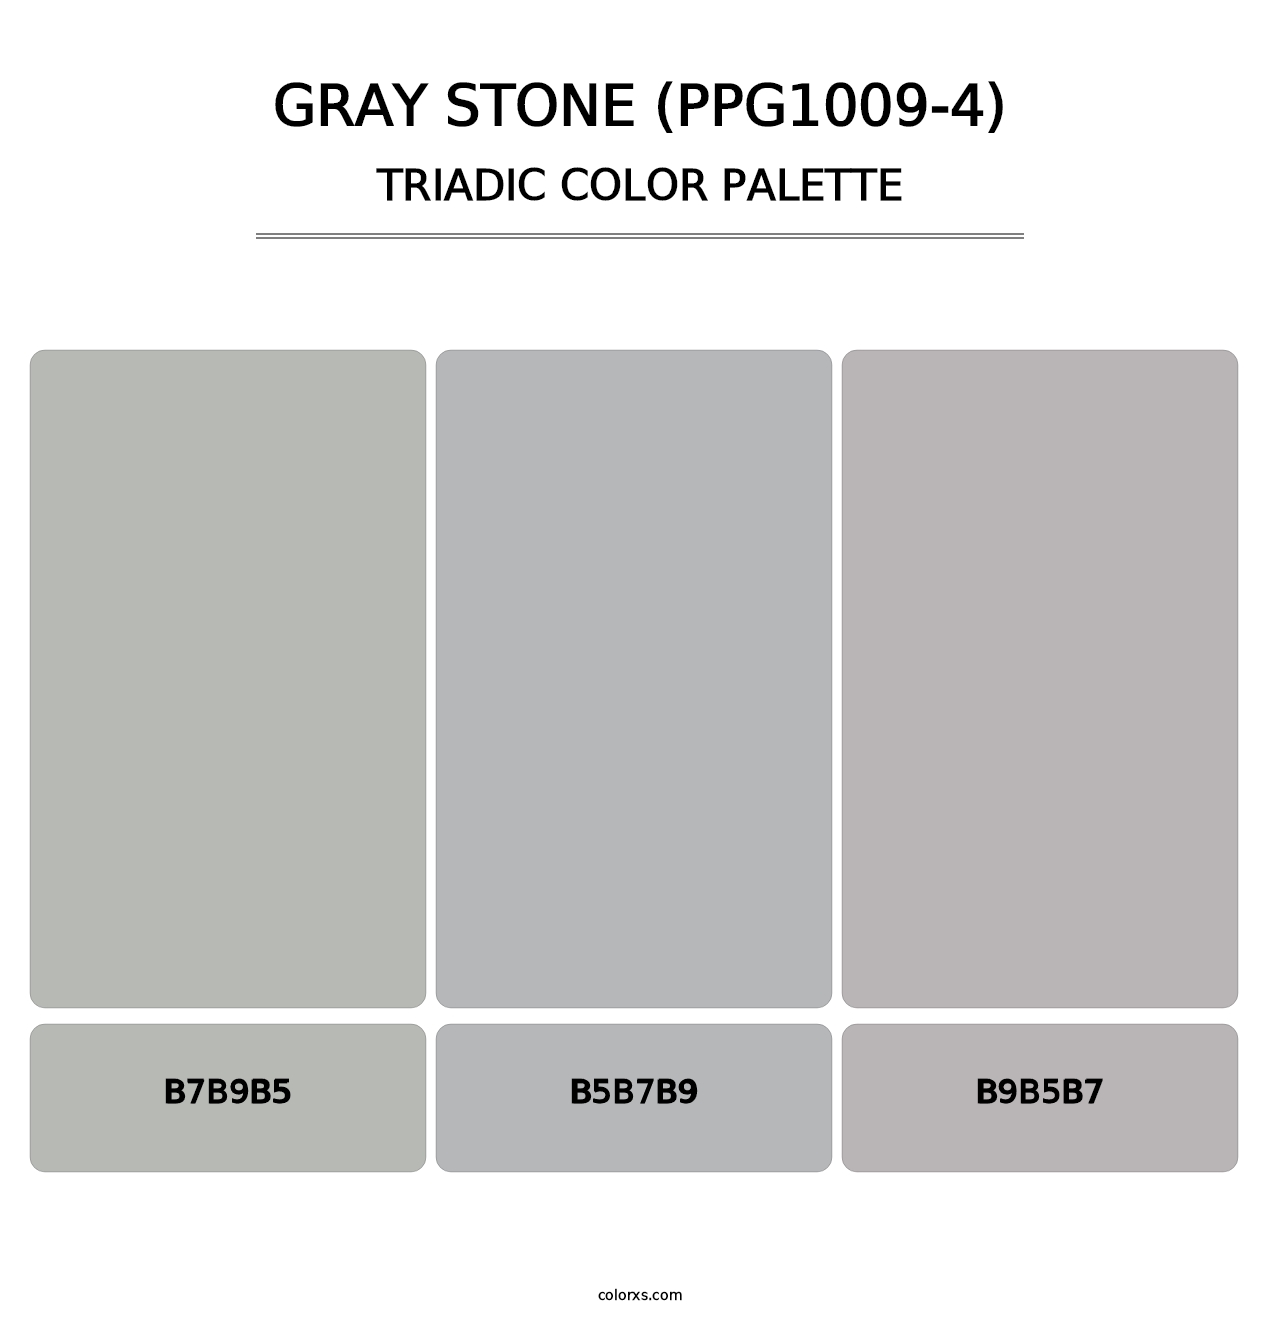 Gray Stone (PPG1009-4) - Triadic Color Palette